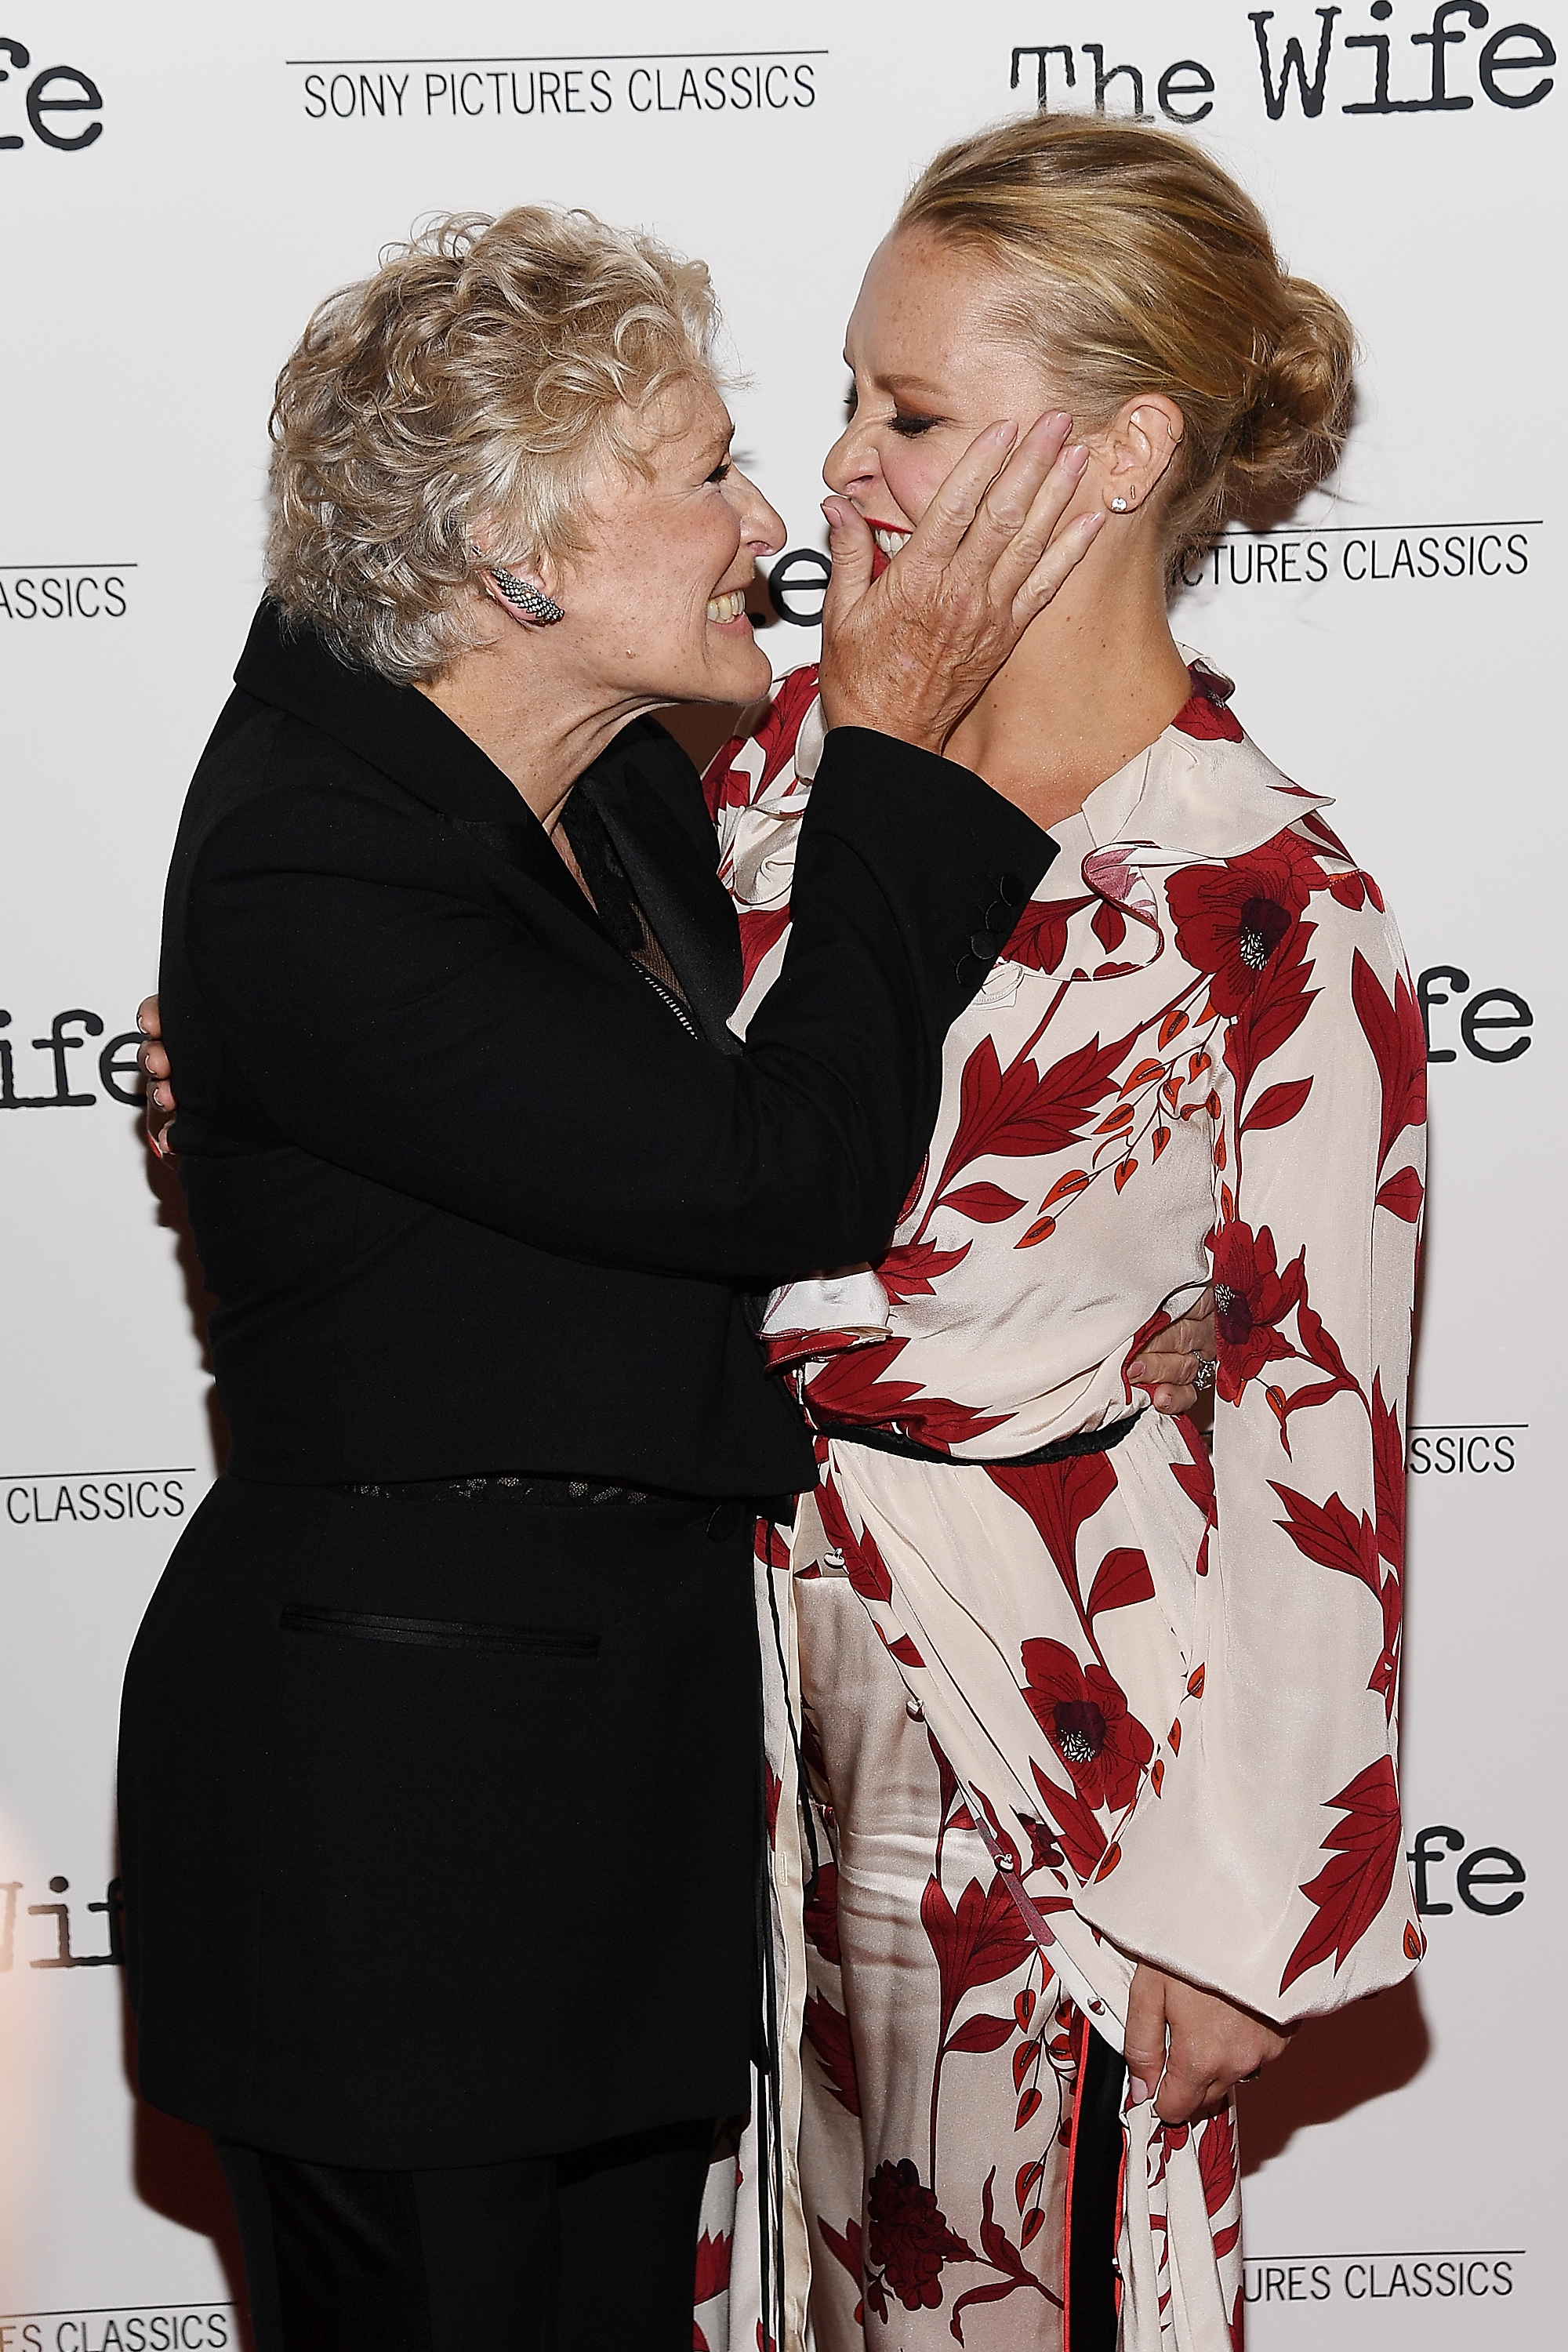 Glenn Close and Annie Starke at the New York screening of "The Wife" on July 26, 2018, in New York City | Source: Getty Images